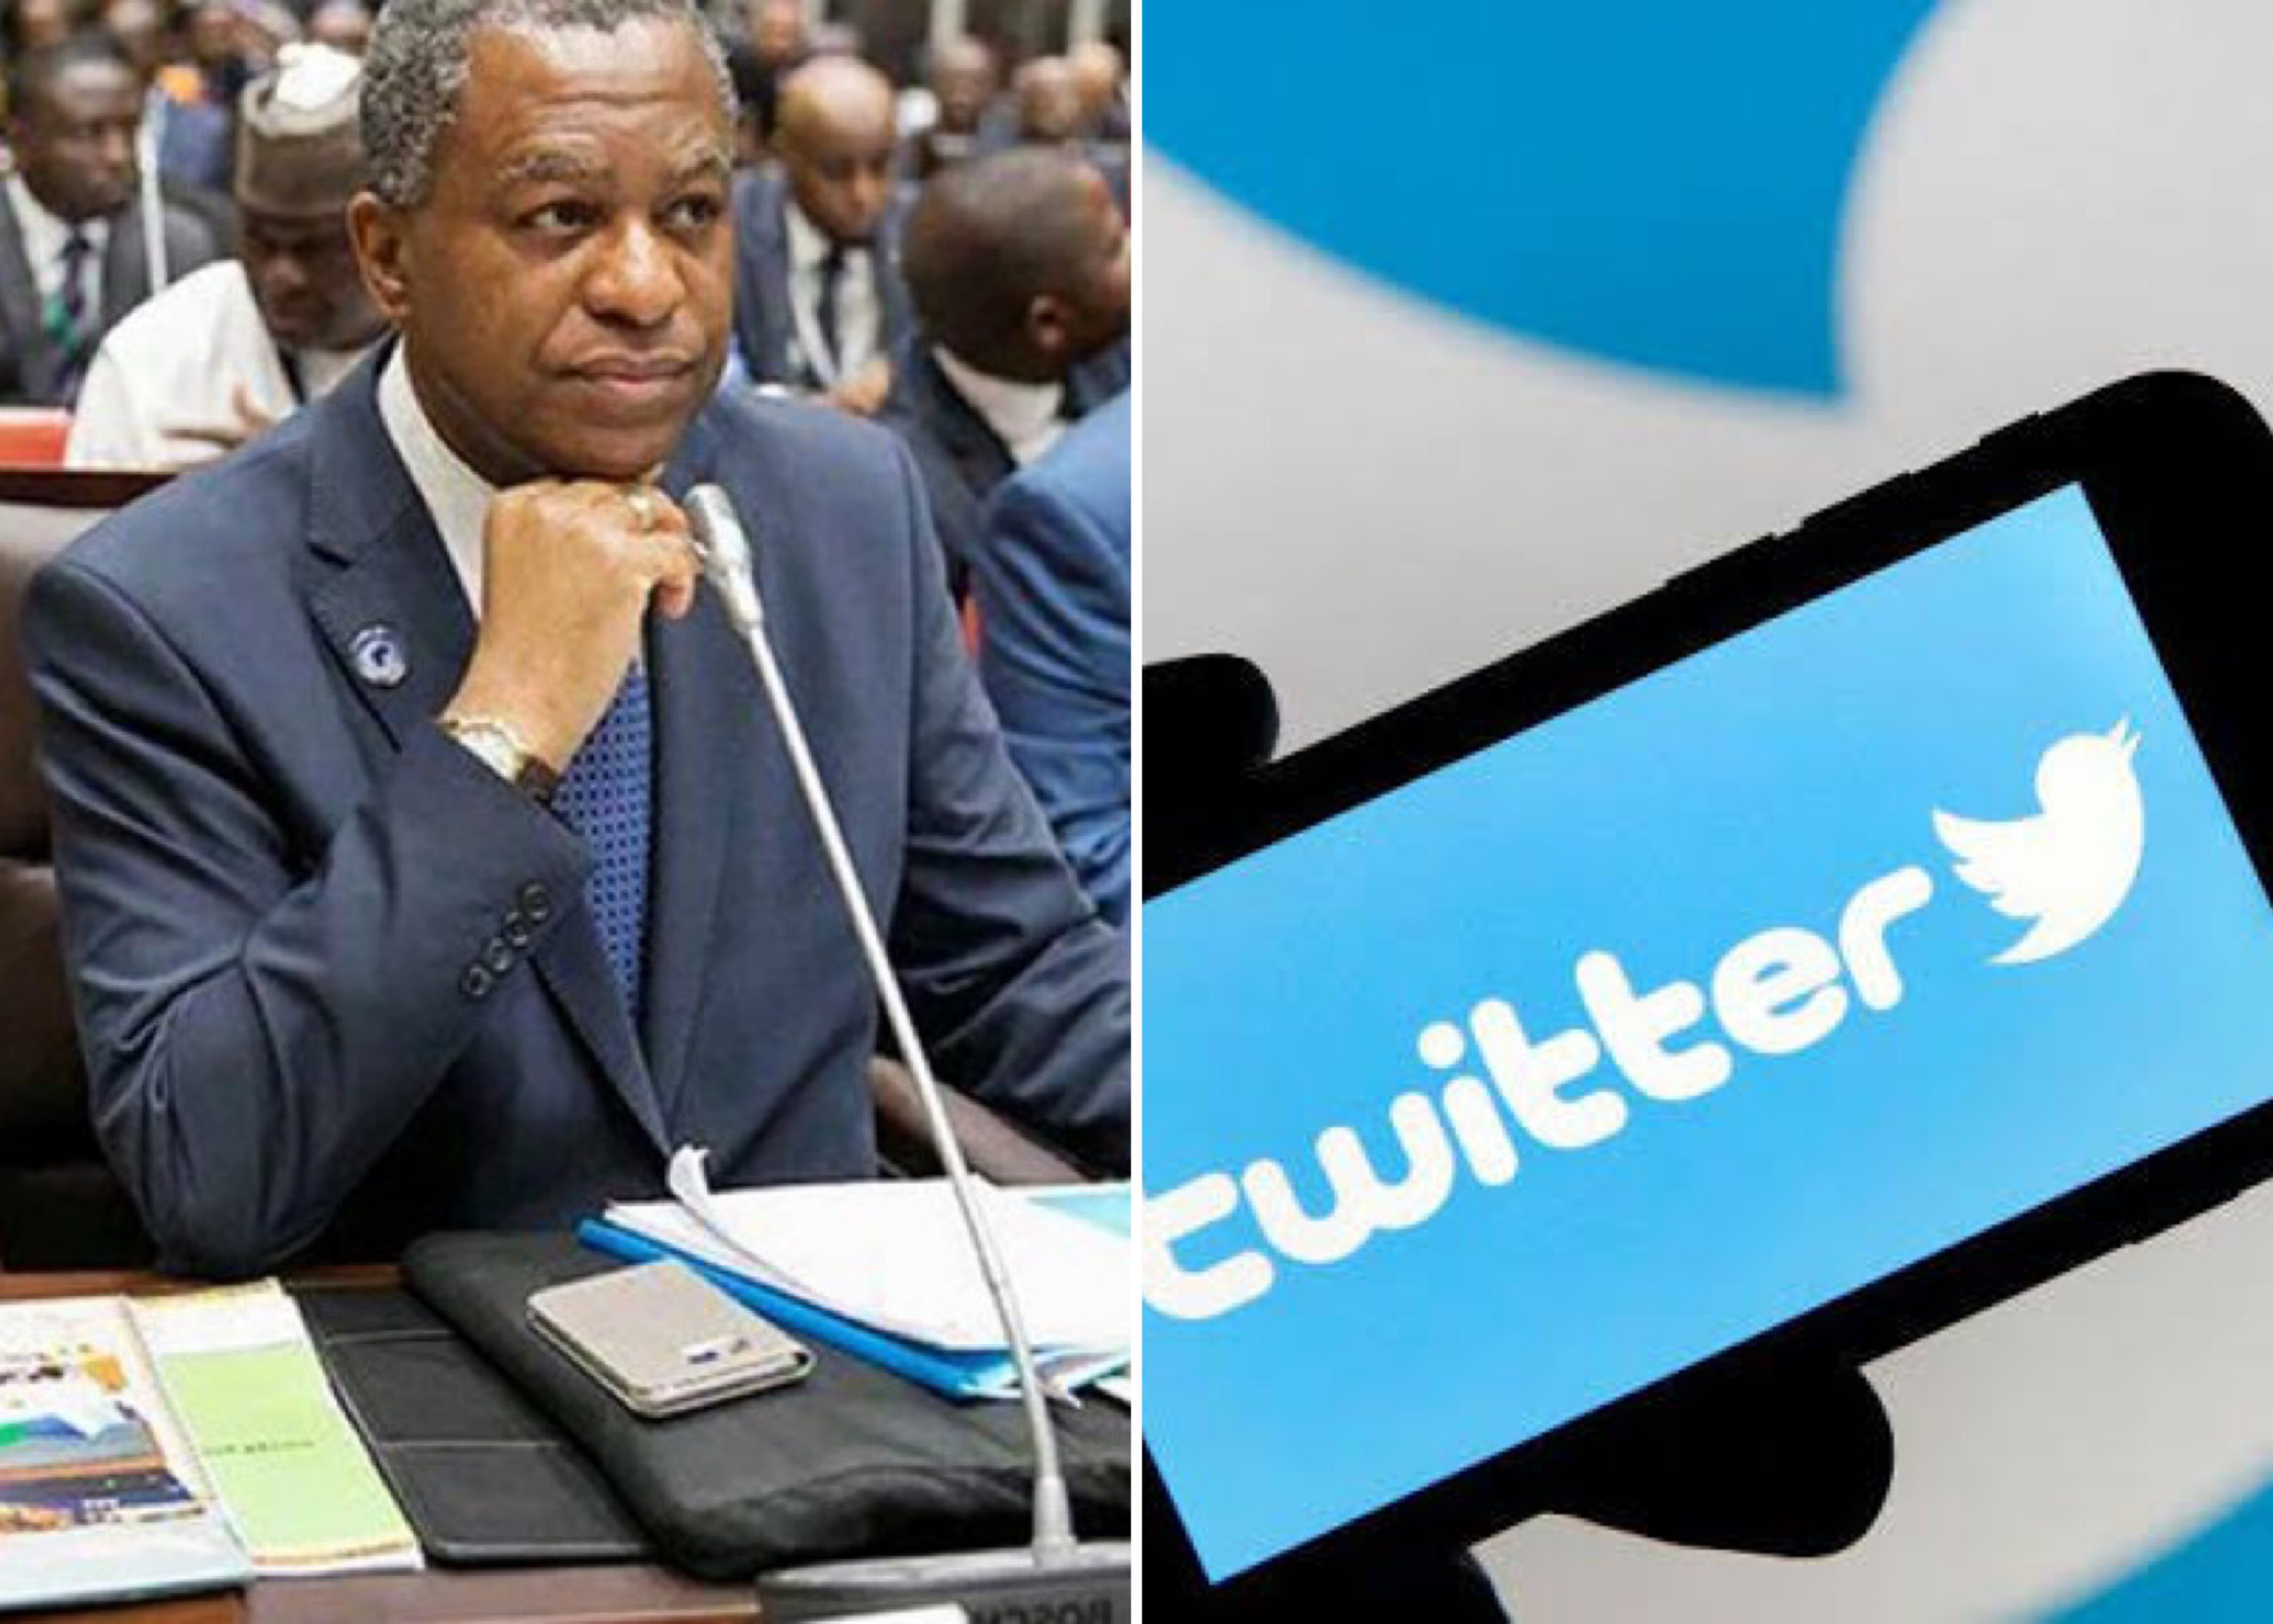 Foreign Affairs Minister, Geoffrey Onyeama Reveals Condition For Lifting Suspension On Twitter